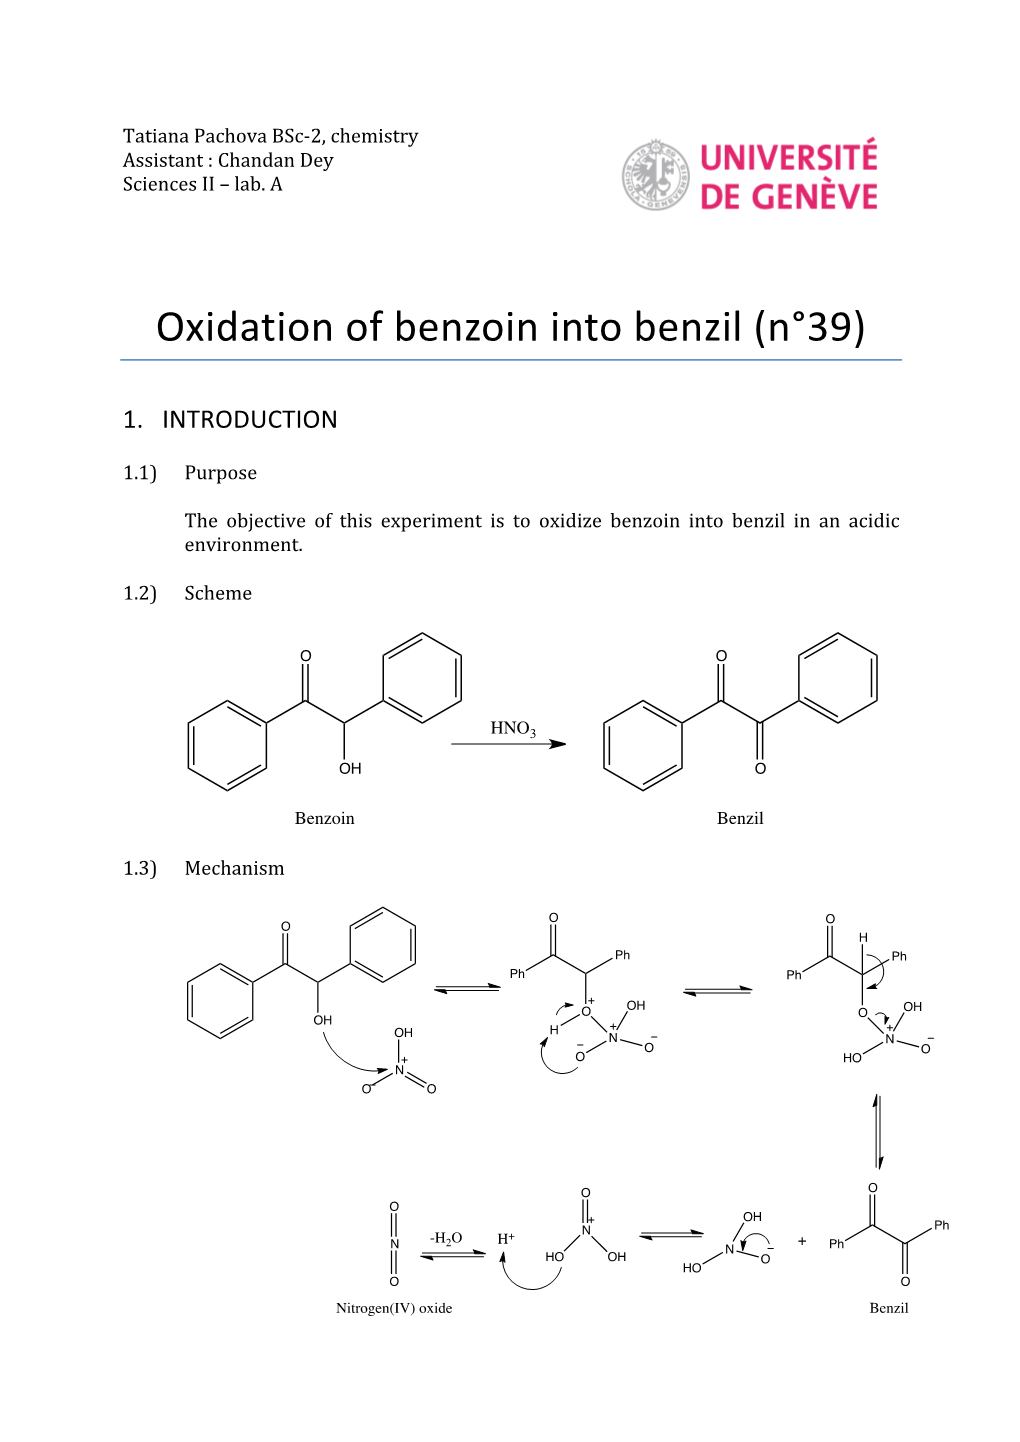 Oxidation of Benzoin Into Benzil (N°39)